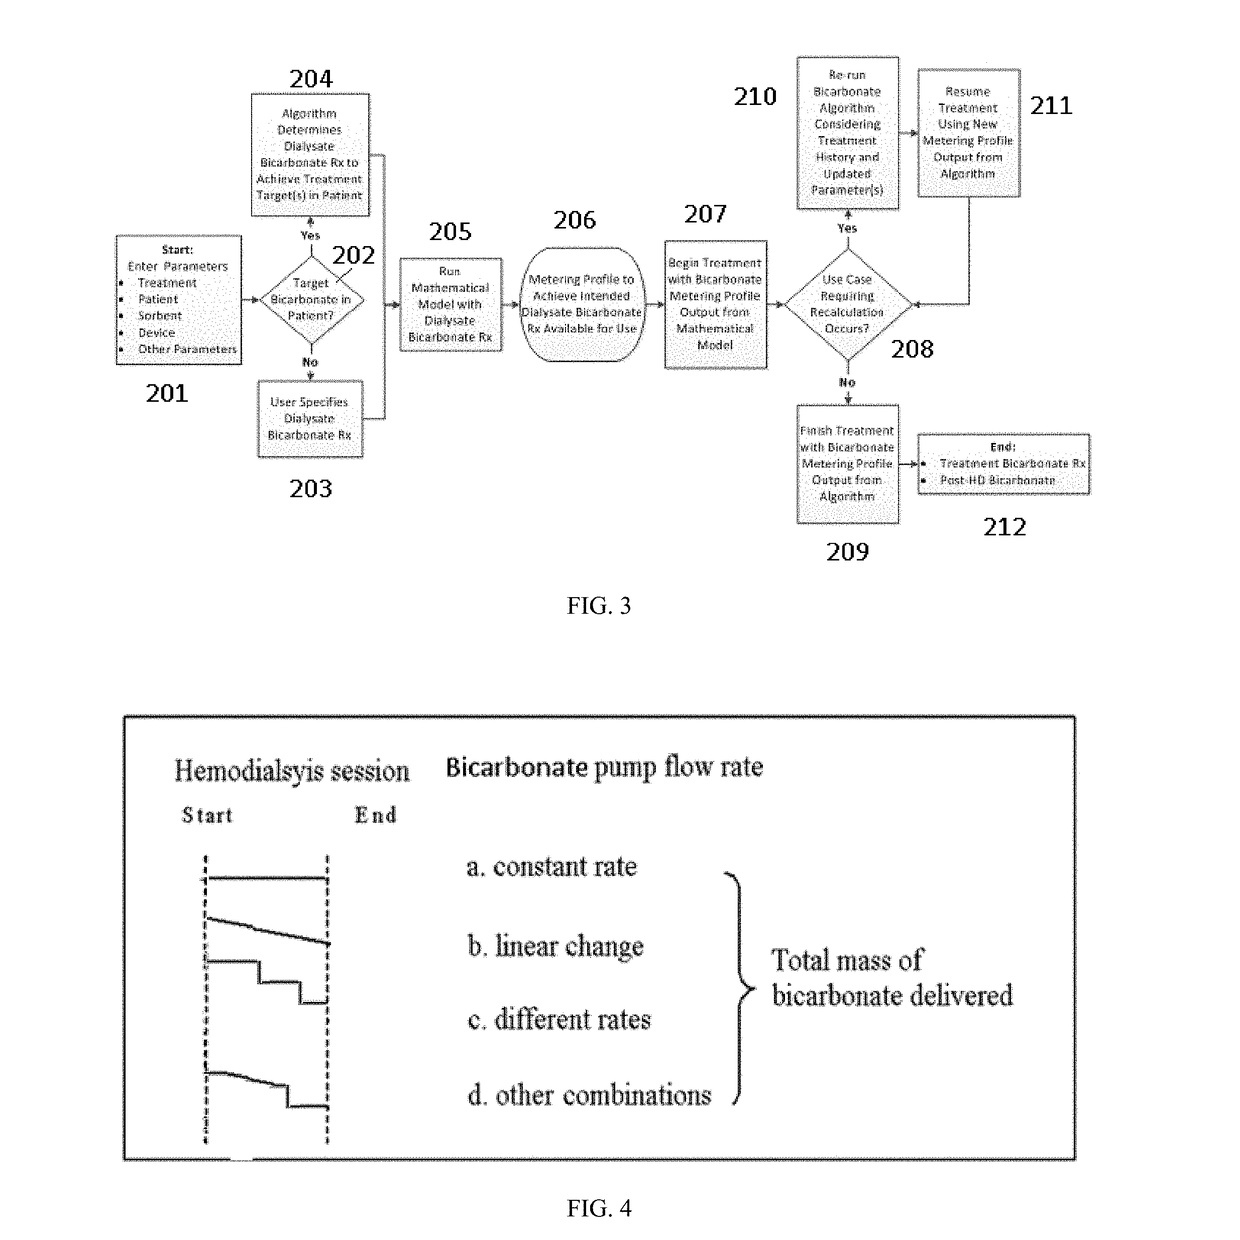 Personalized bicarbonate management systems and methods for sorbent-based hemodialysis